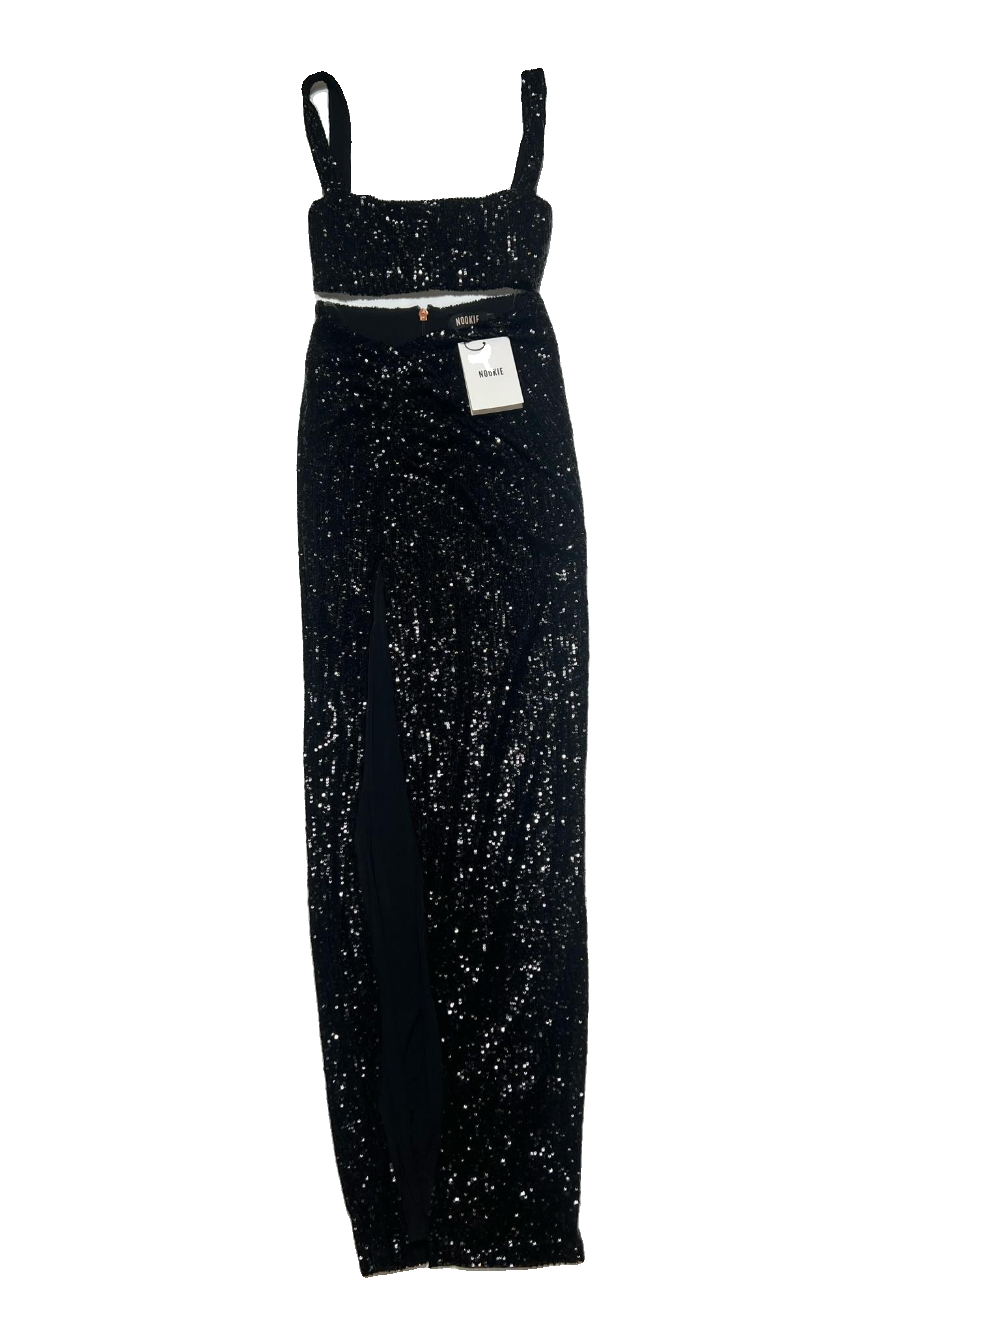 Nookie - Black Sequin Set with Slit - NEW WITH TAGS